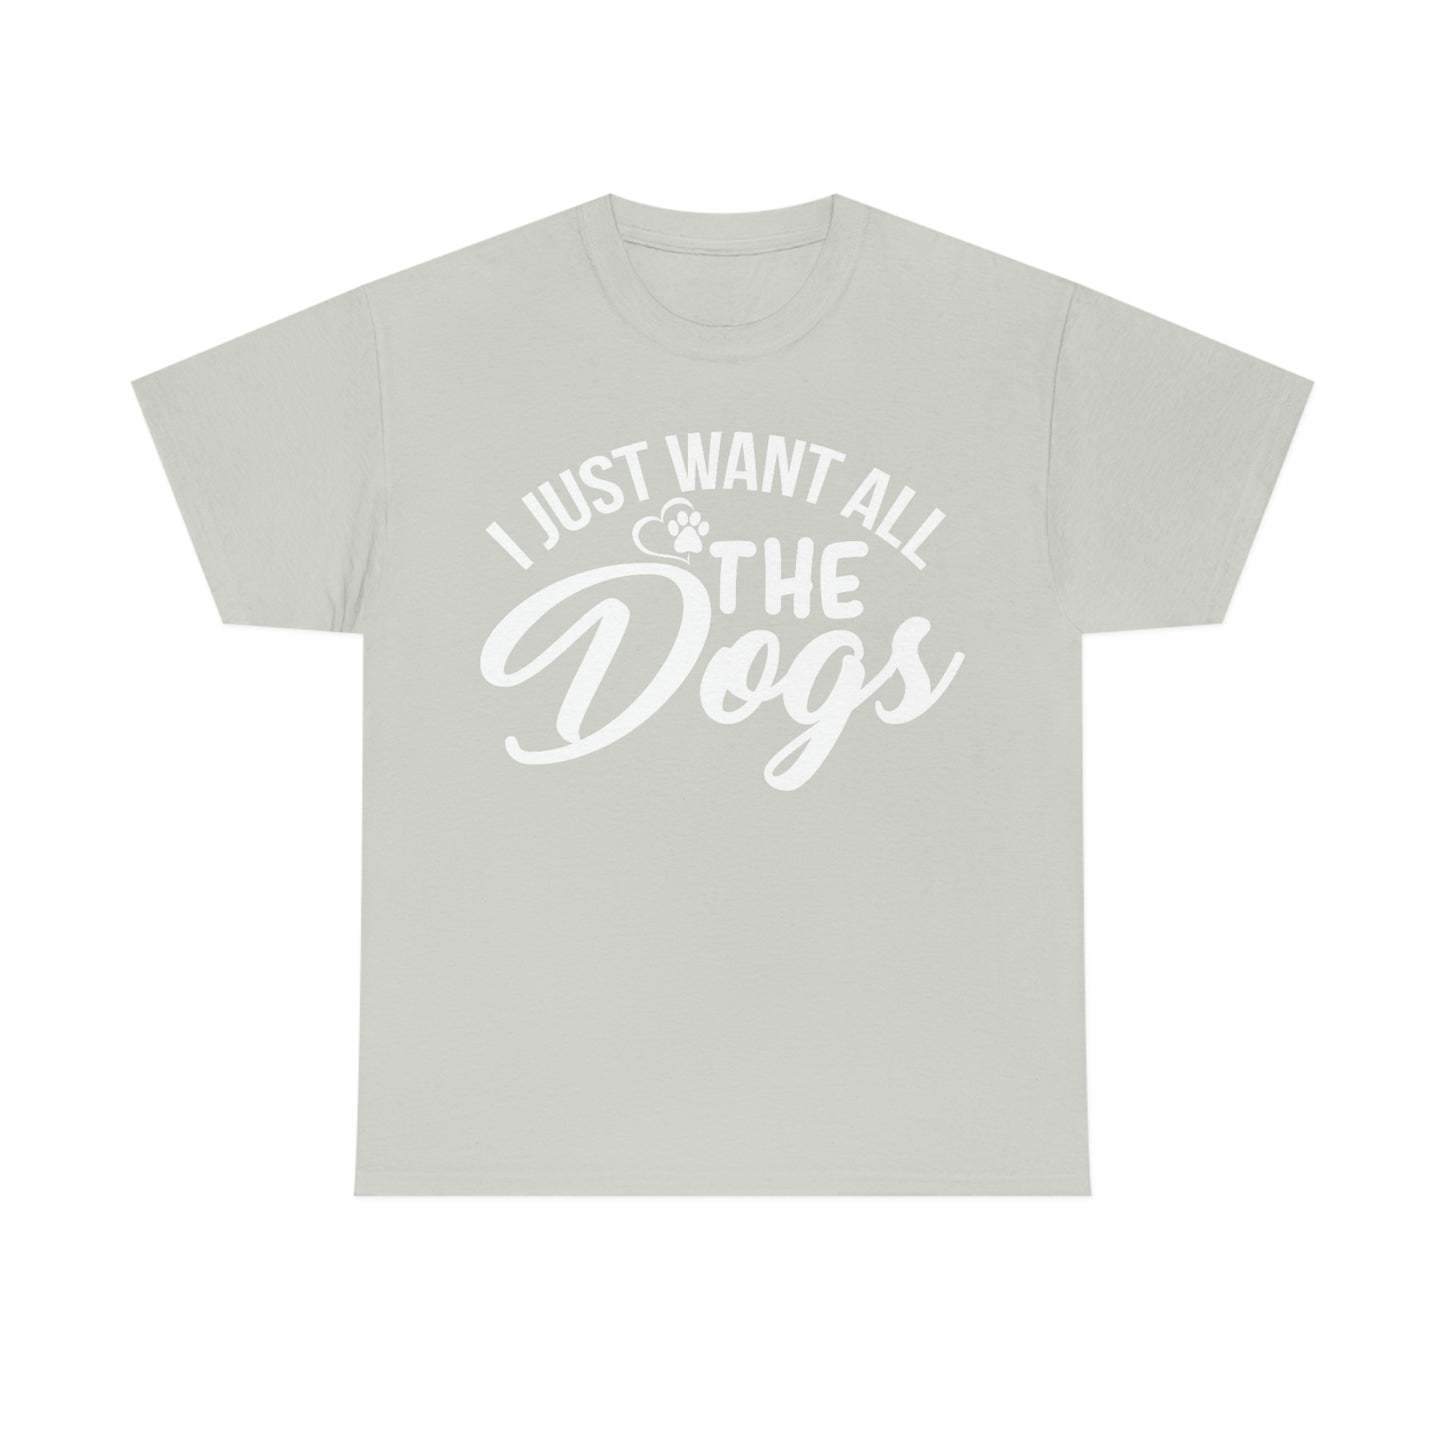 I Just want all the Dogs Cotton Tee